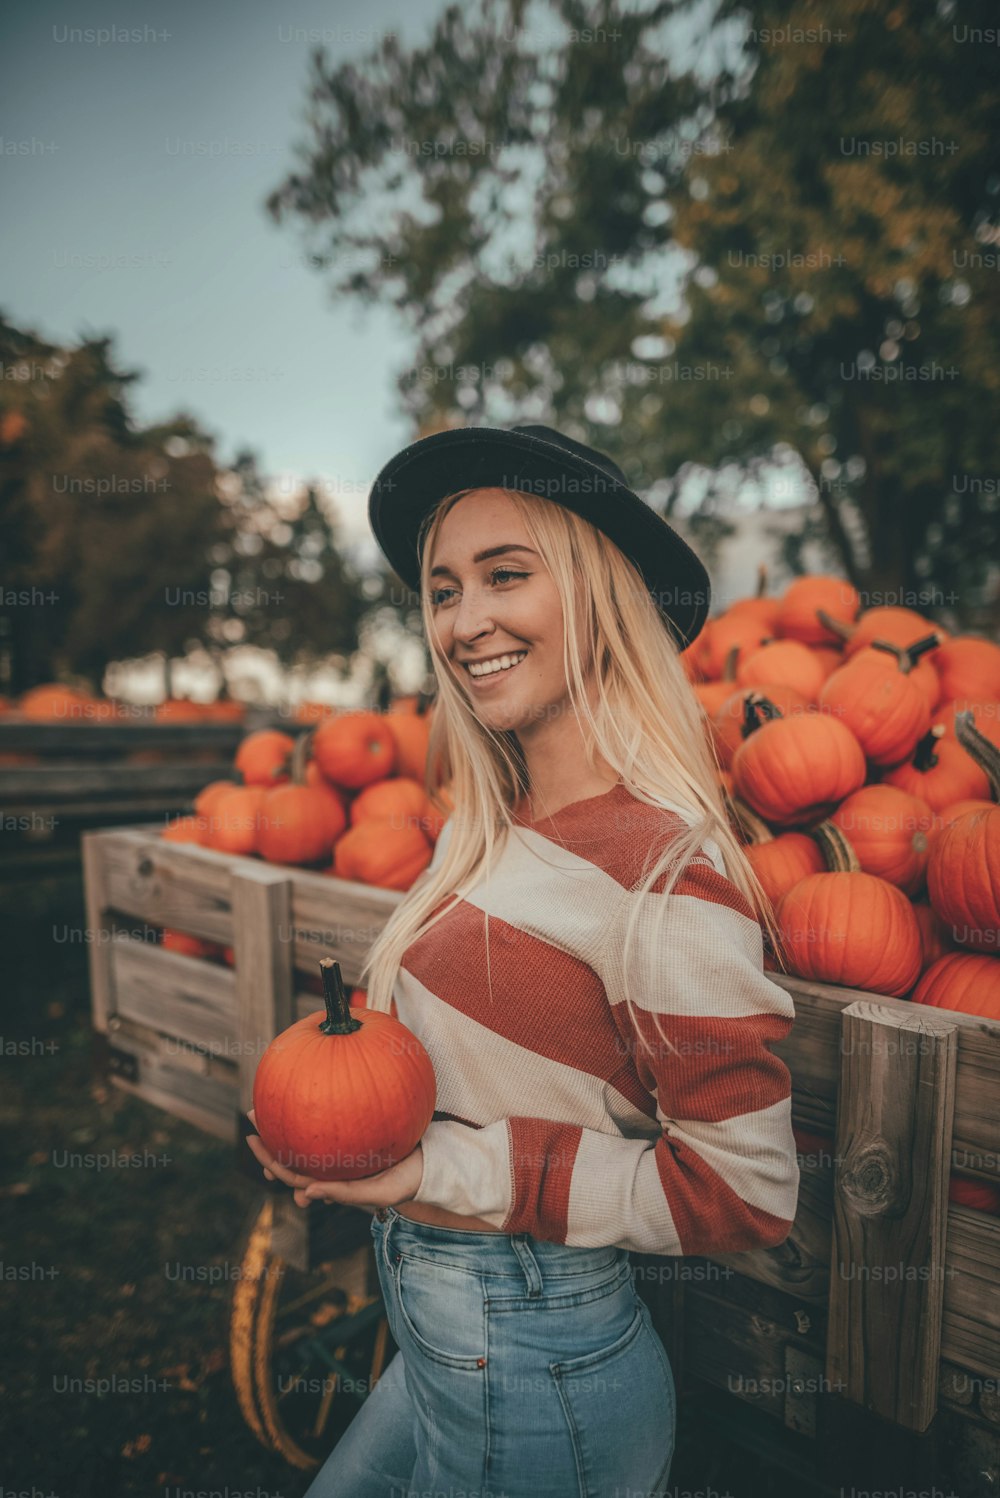 a woman standing in front of a truck full of pumpkins